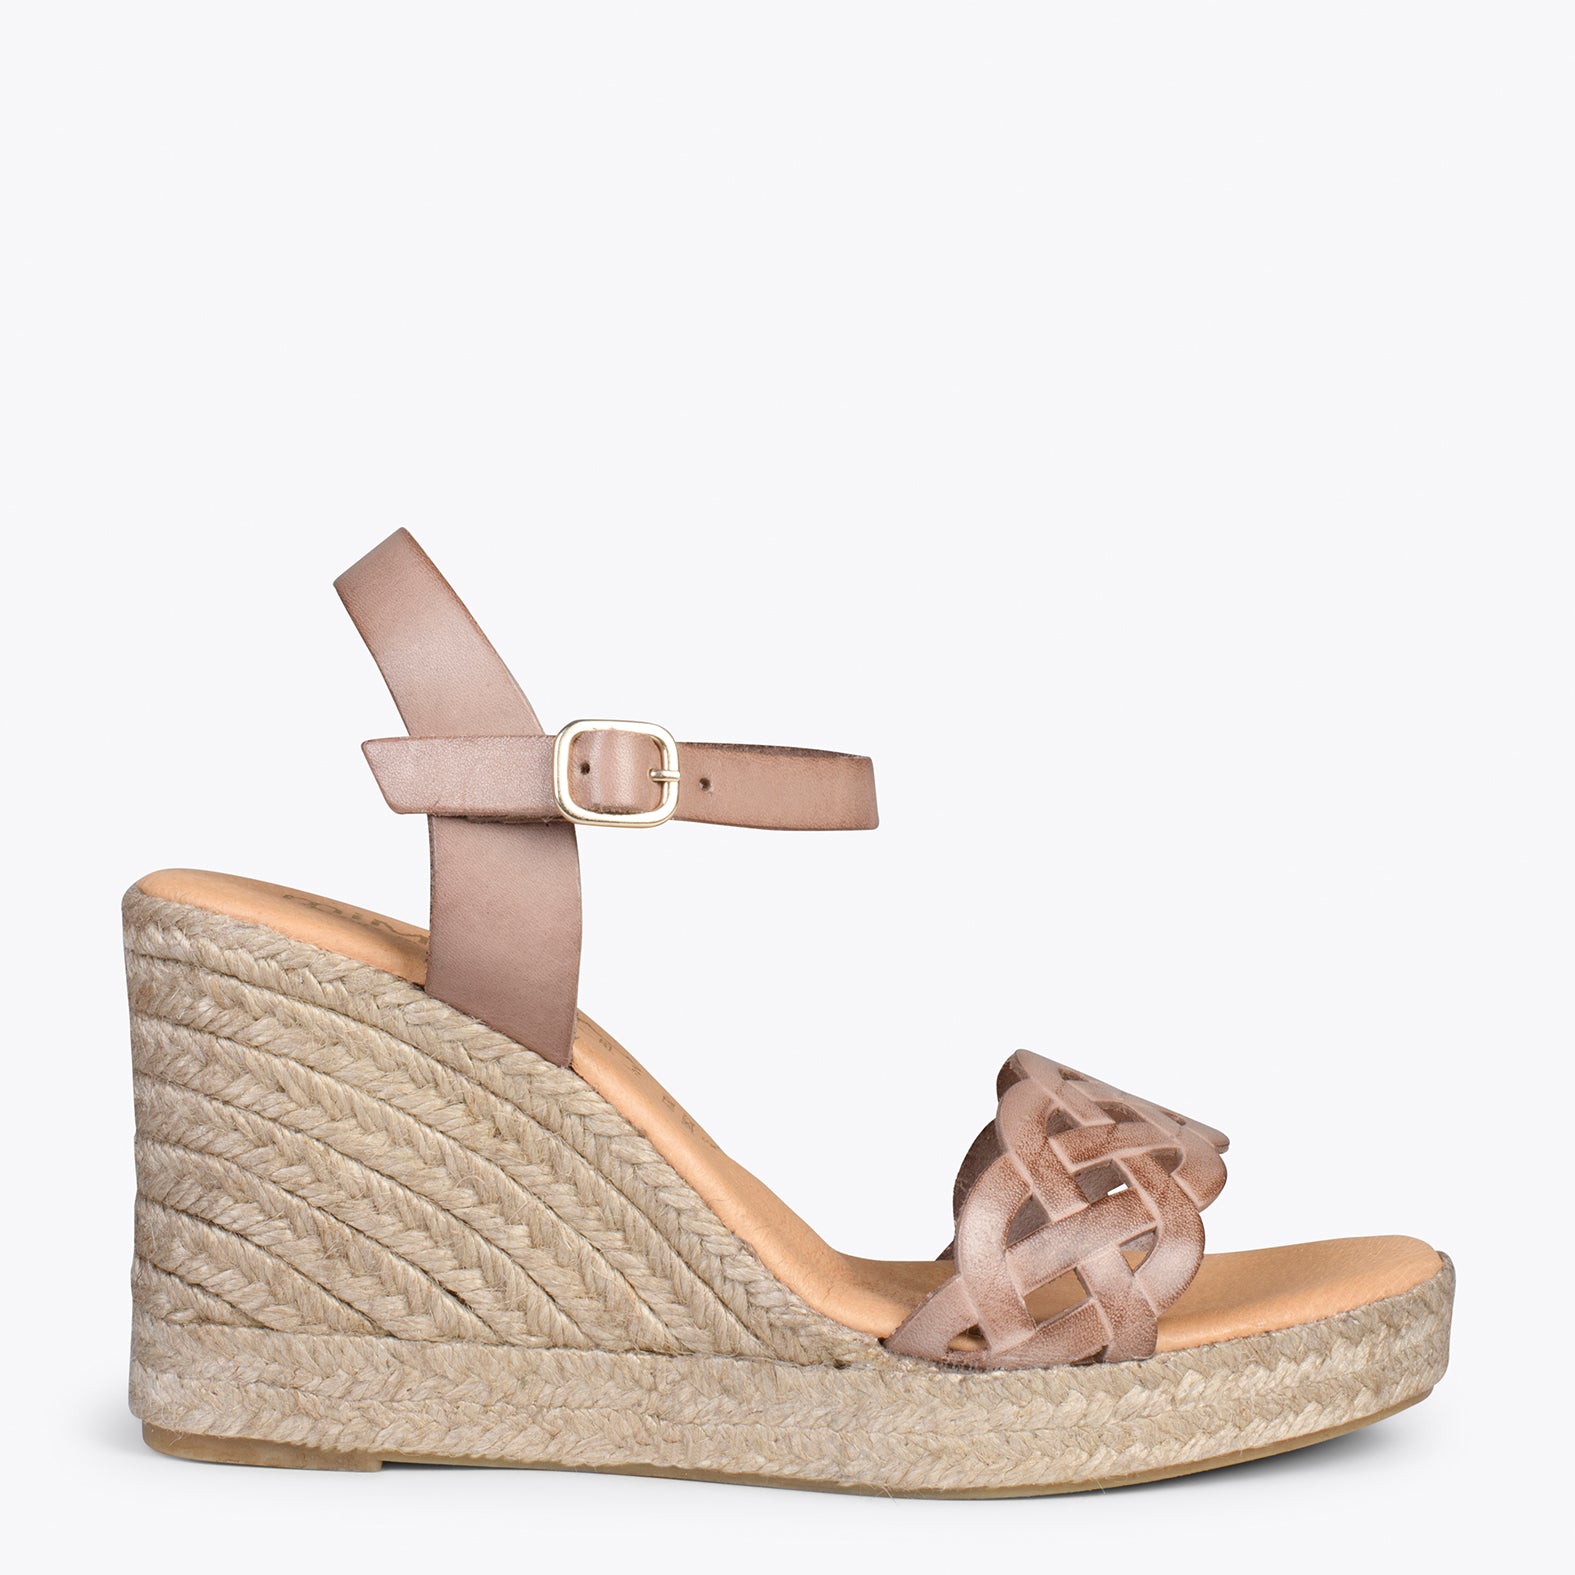 OASIS – TAUPE espadrille wedges with braided front